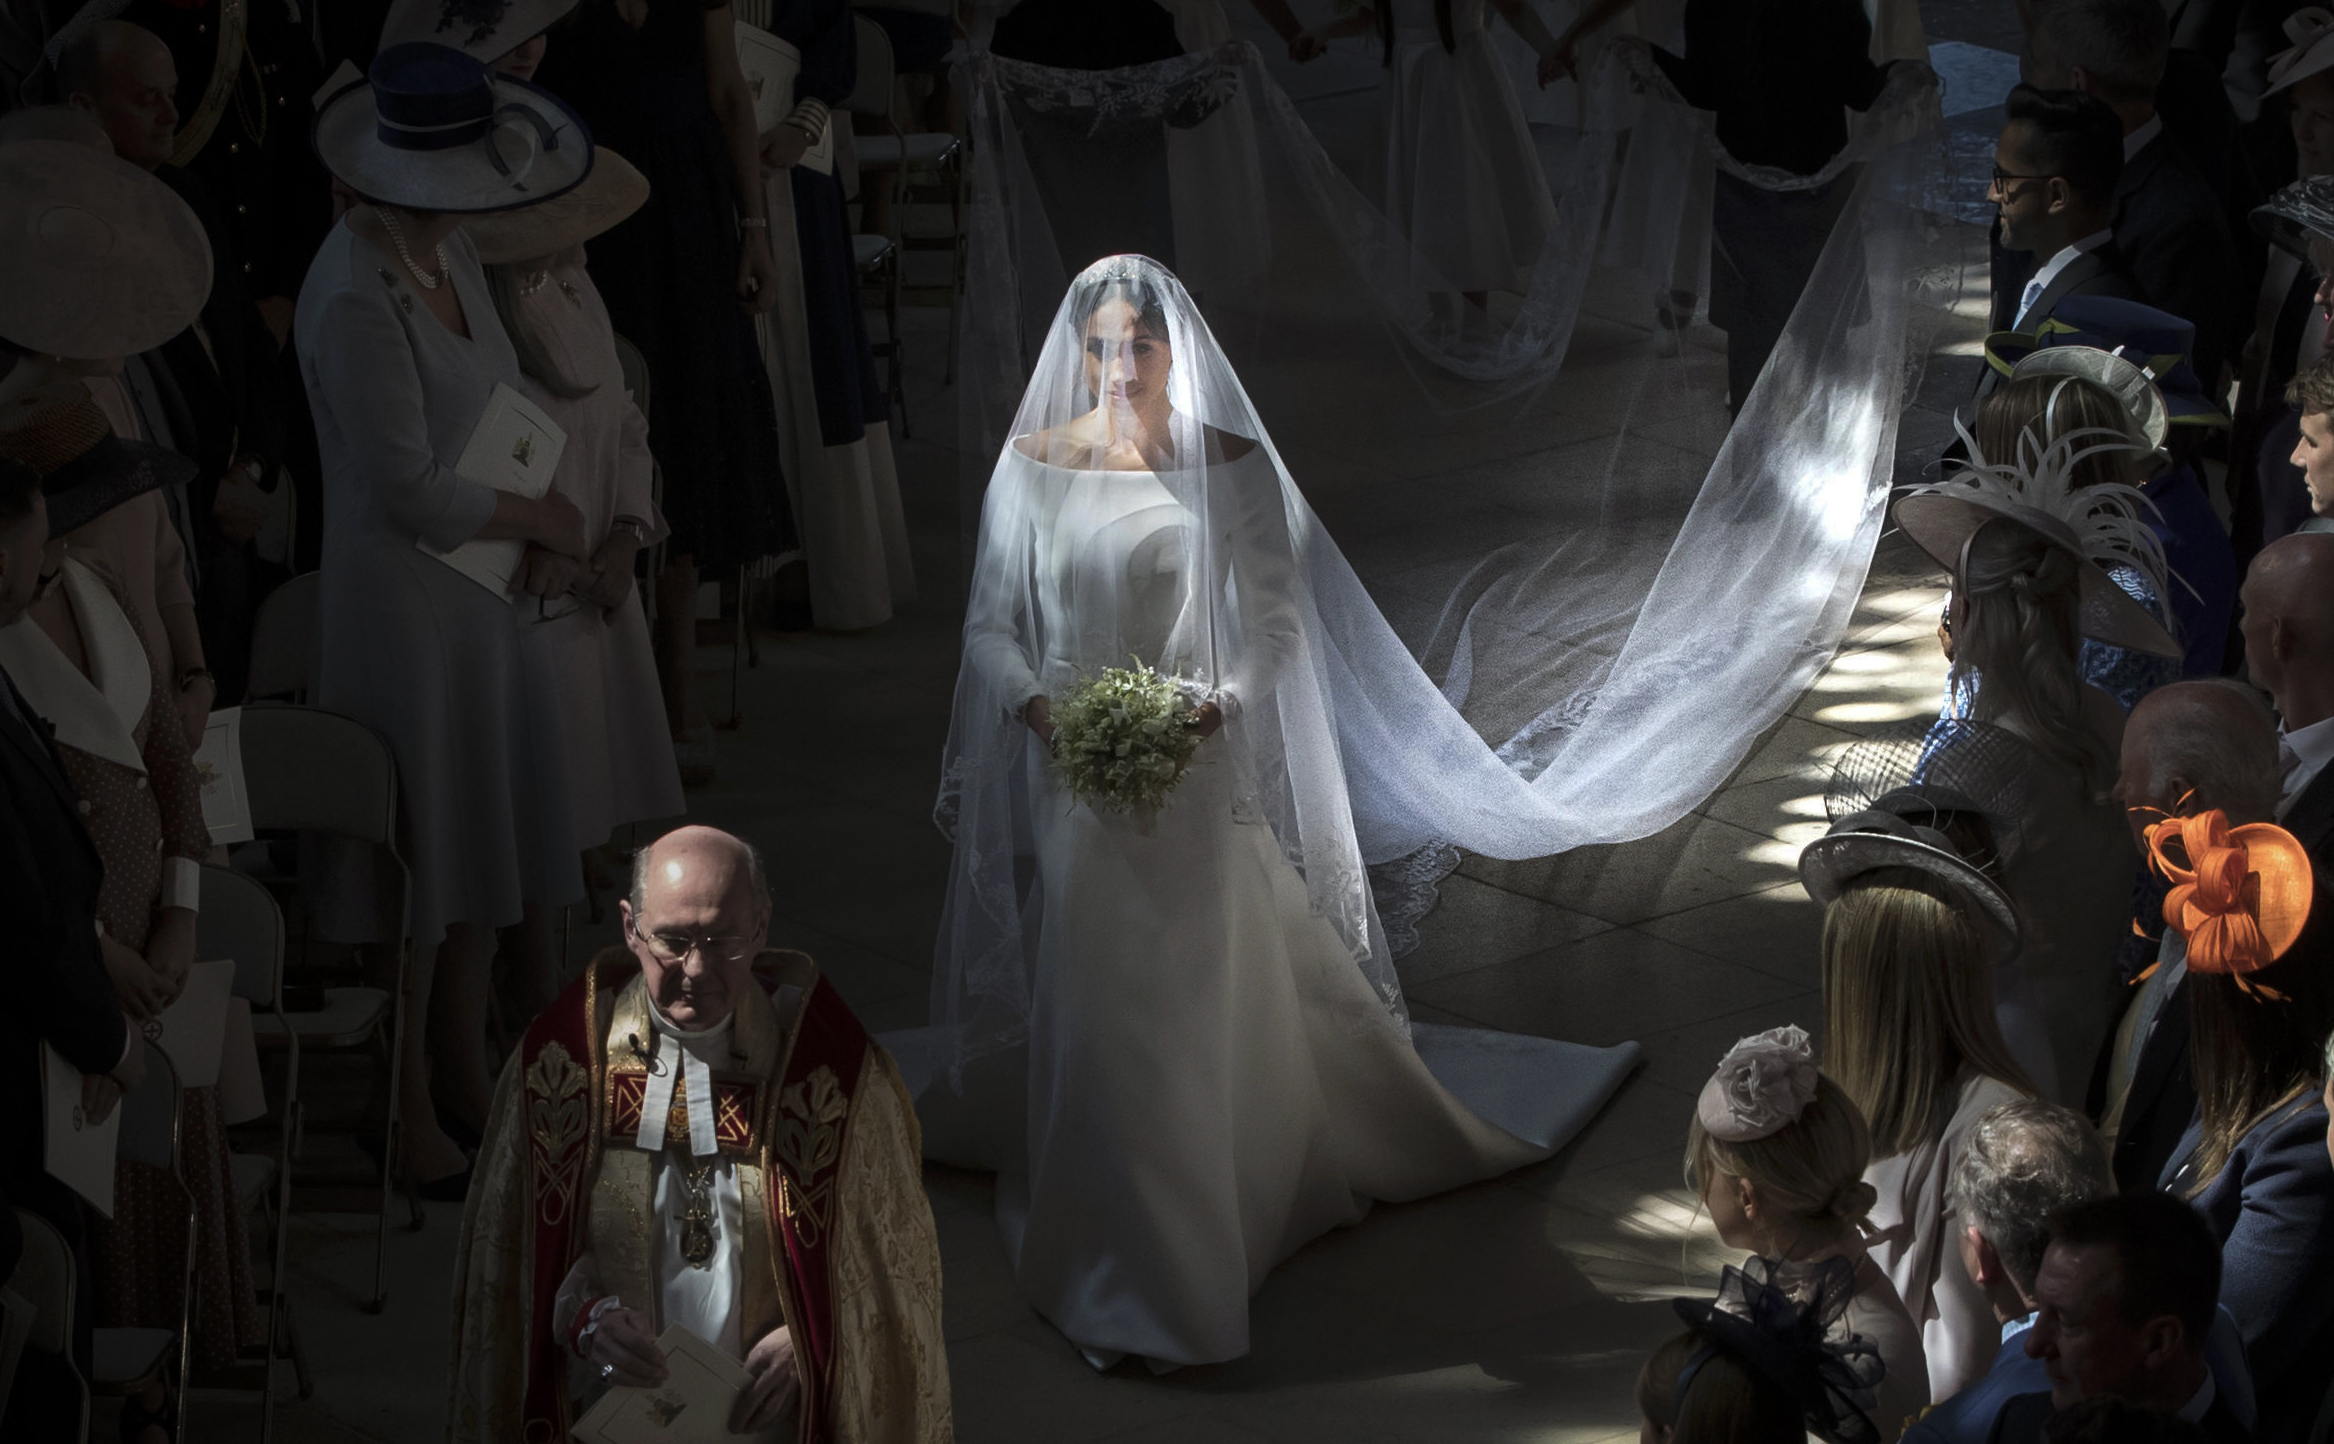 Markle walks down the aisle in St. George's Chapel. (Danny Lawson—AFP/Getty Images)